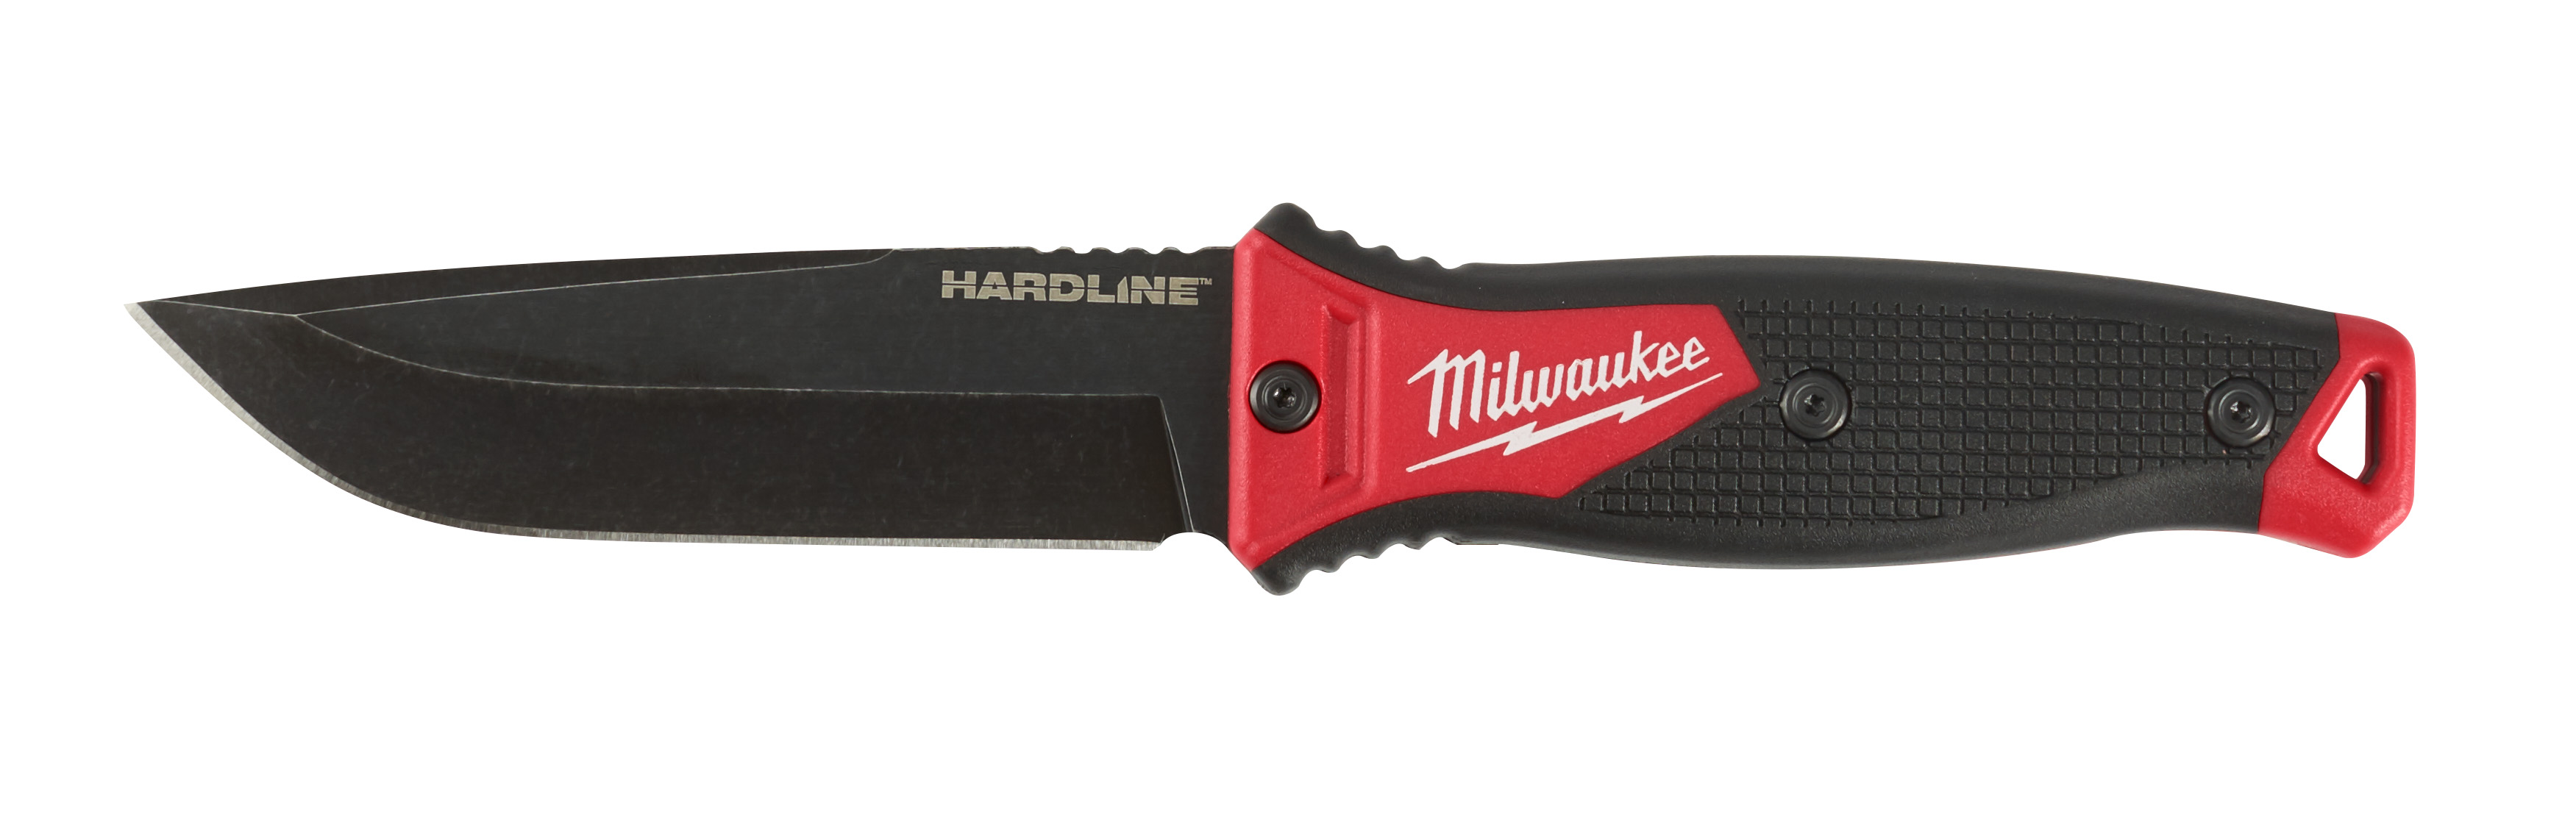 Milwaukee® HARDLINE™ knives deliver uncompromising performance on or off the jobsite. This 5 in. Fixed blade knife features an AUS-8 steel blade with a full tang for ultimate durability. An overmolded handle provides a strong, secure grip. The durable molded sheath can be mounted vertically or horizontally on belts and web mounting systems.